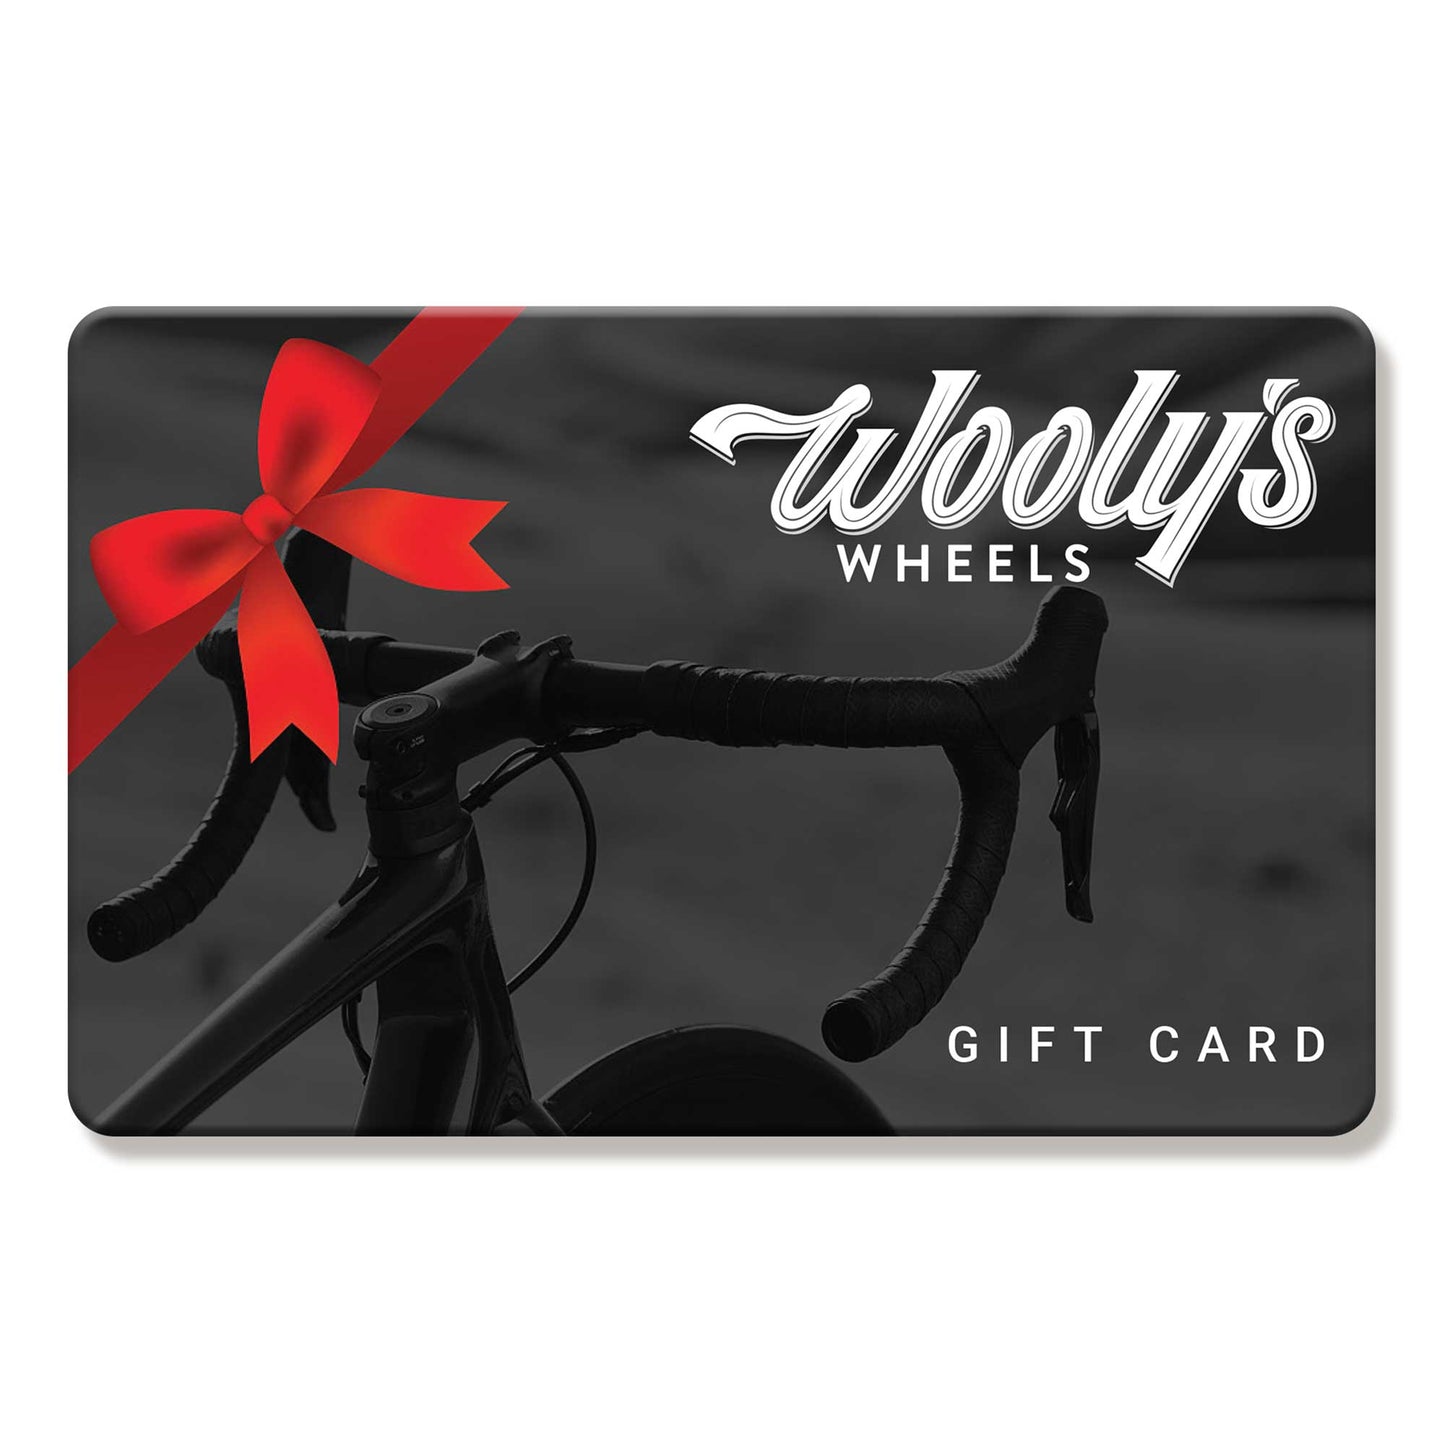 $250.00 Gift Card (online use only)